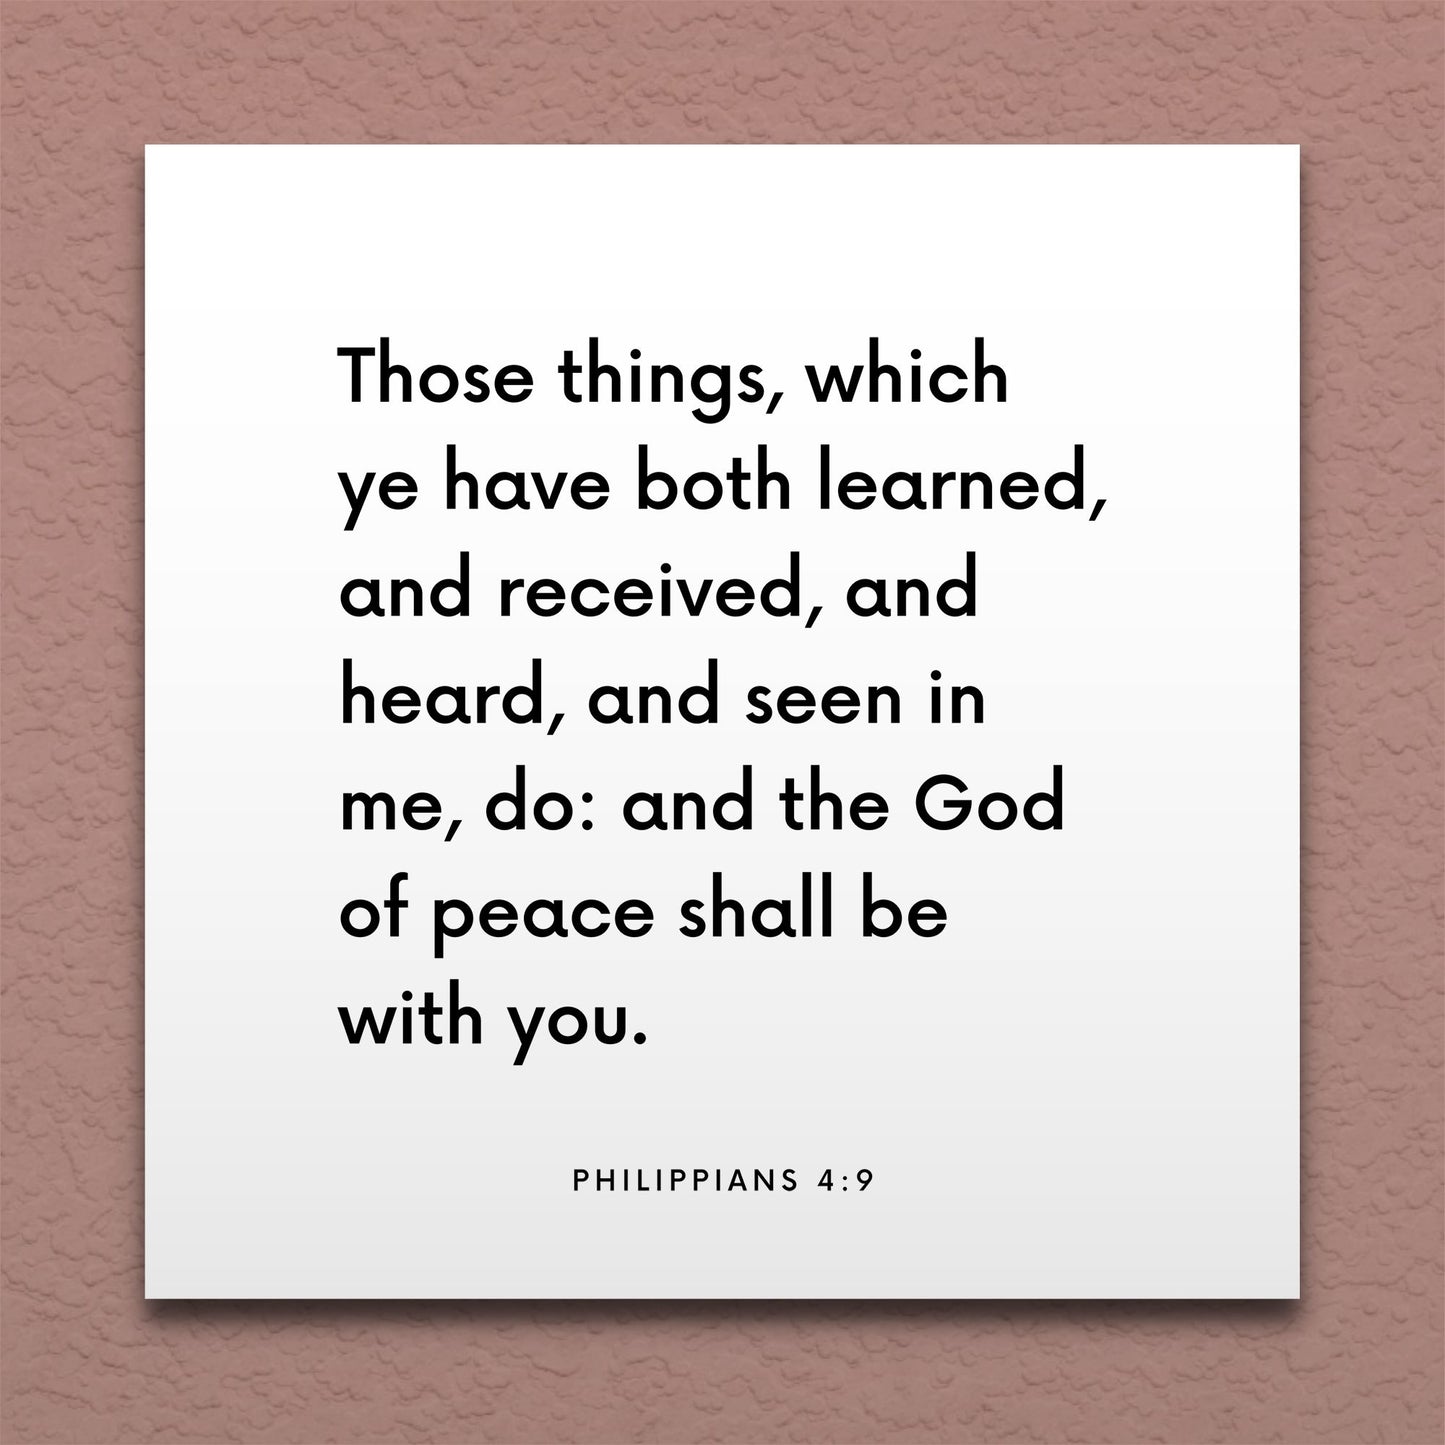 Wall-mounted scripture tile for Philippians 4:9 - "Those things which ye have seen in me, do"